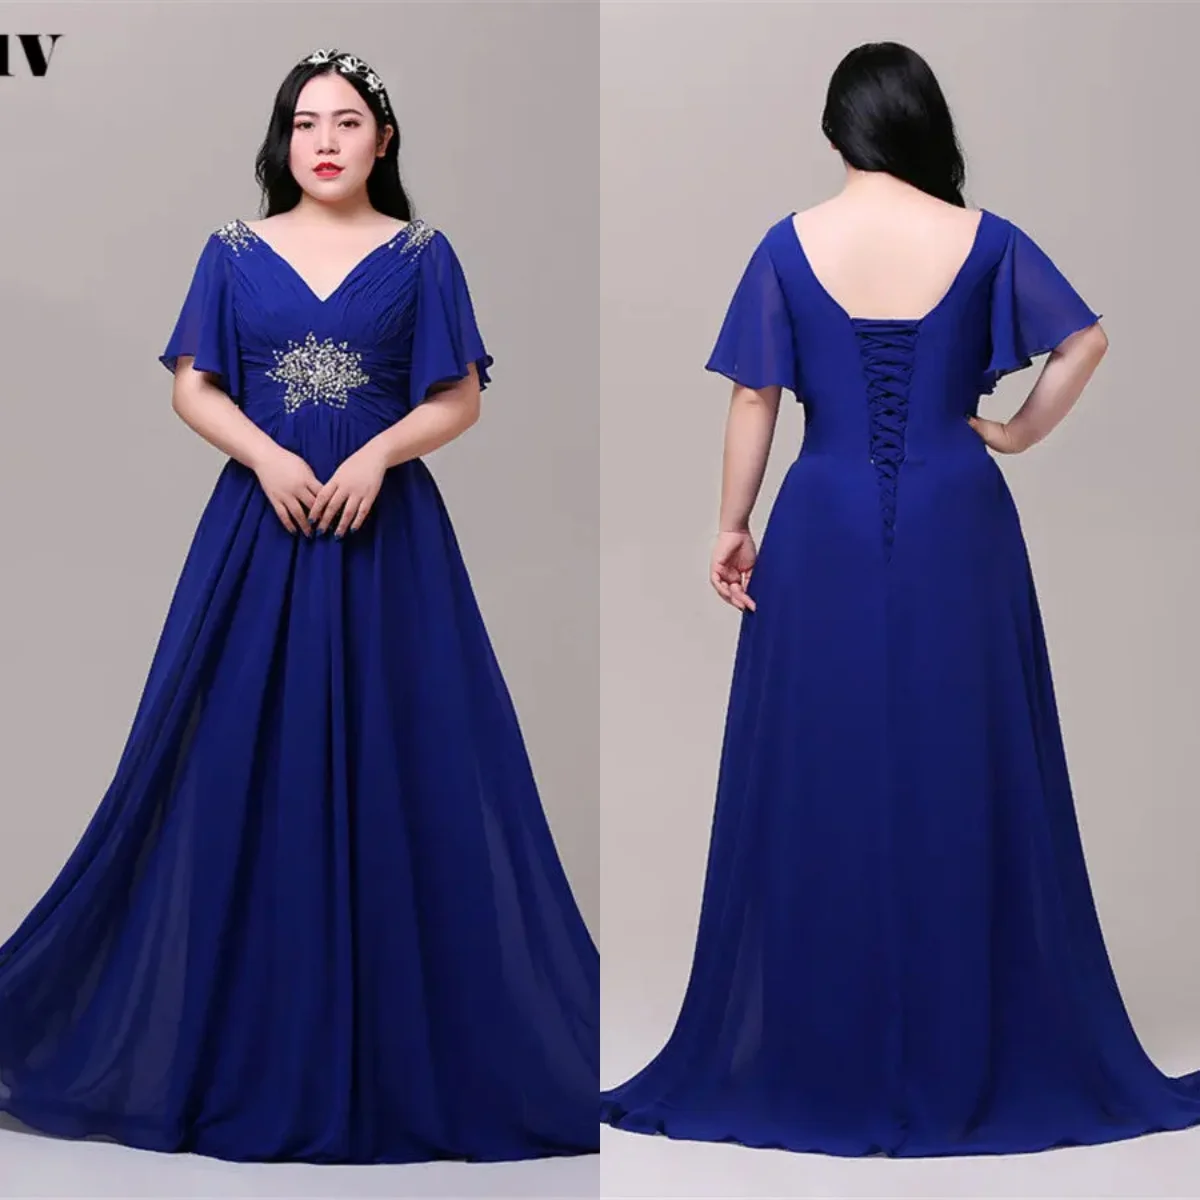 

Evening Dress Robe De Soiree Royal Blue Chiffon V-neck Short Sleeves Beads A-line Floor Length Plus size Women Party Formal Gown